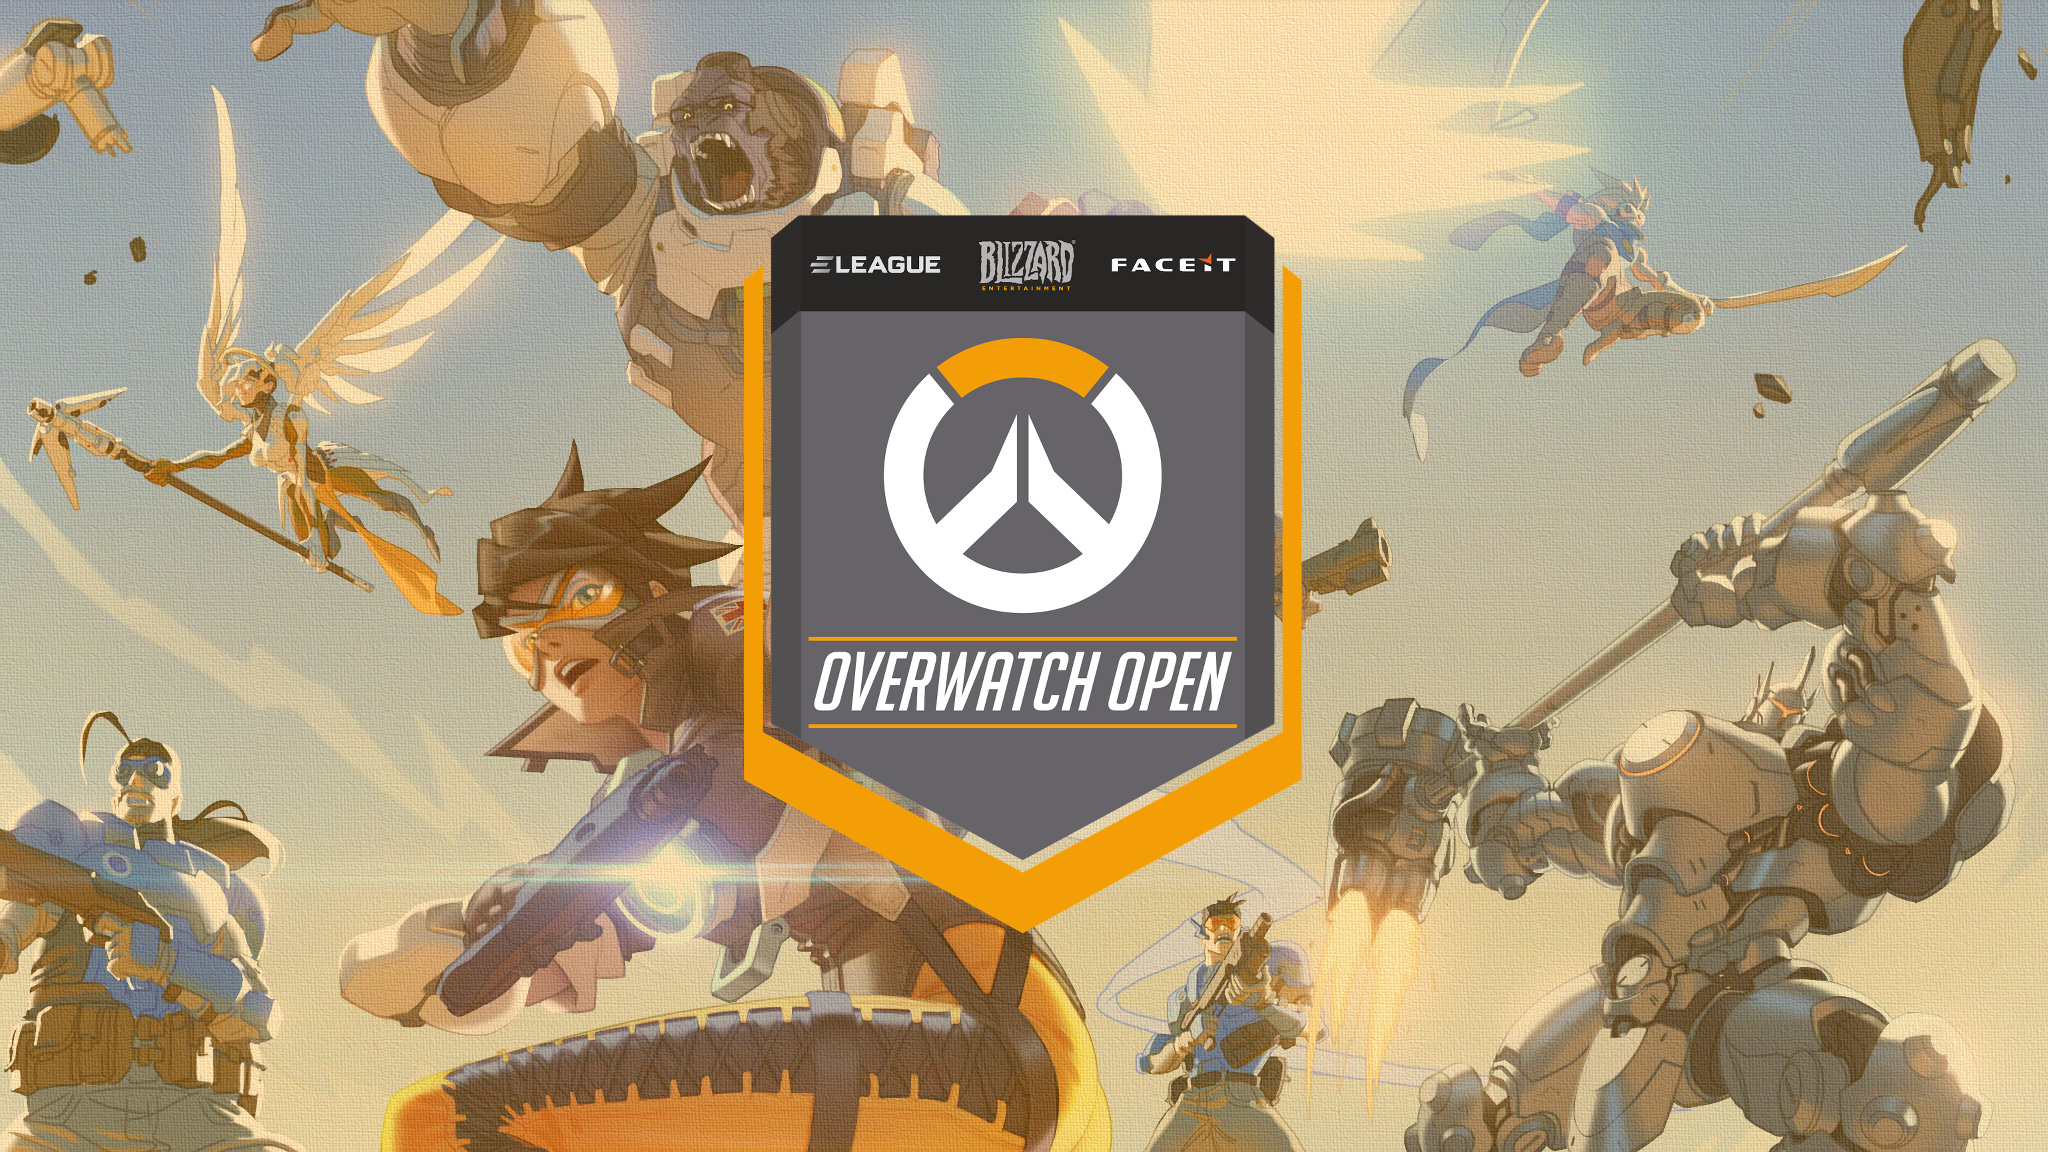 An Overwatch tournament is coming to ELEAGUE with finals airing live on